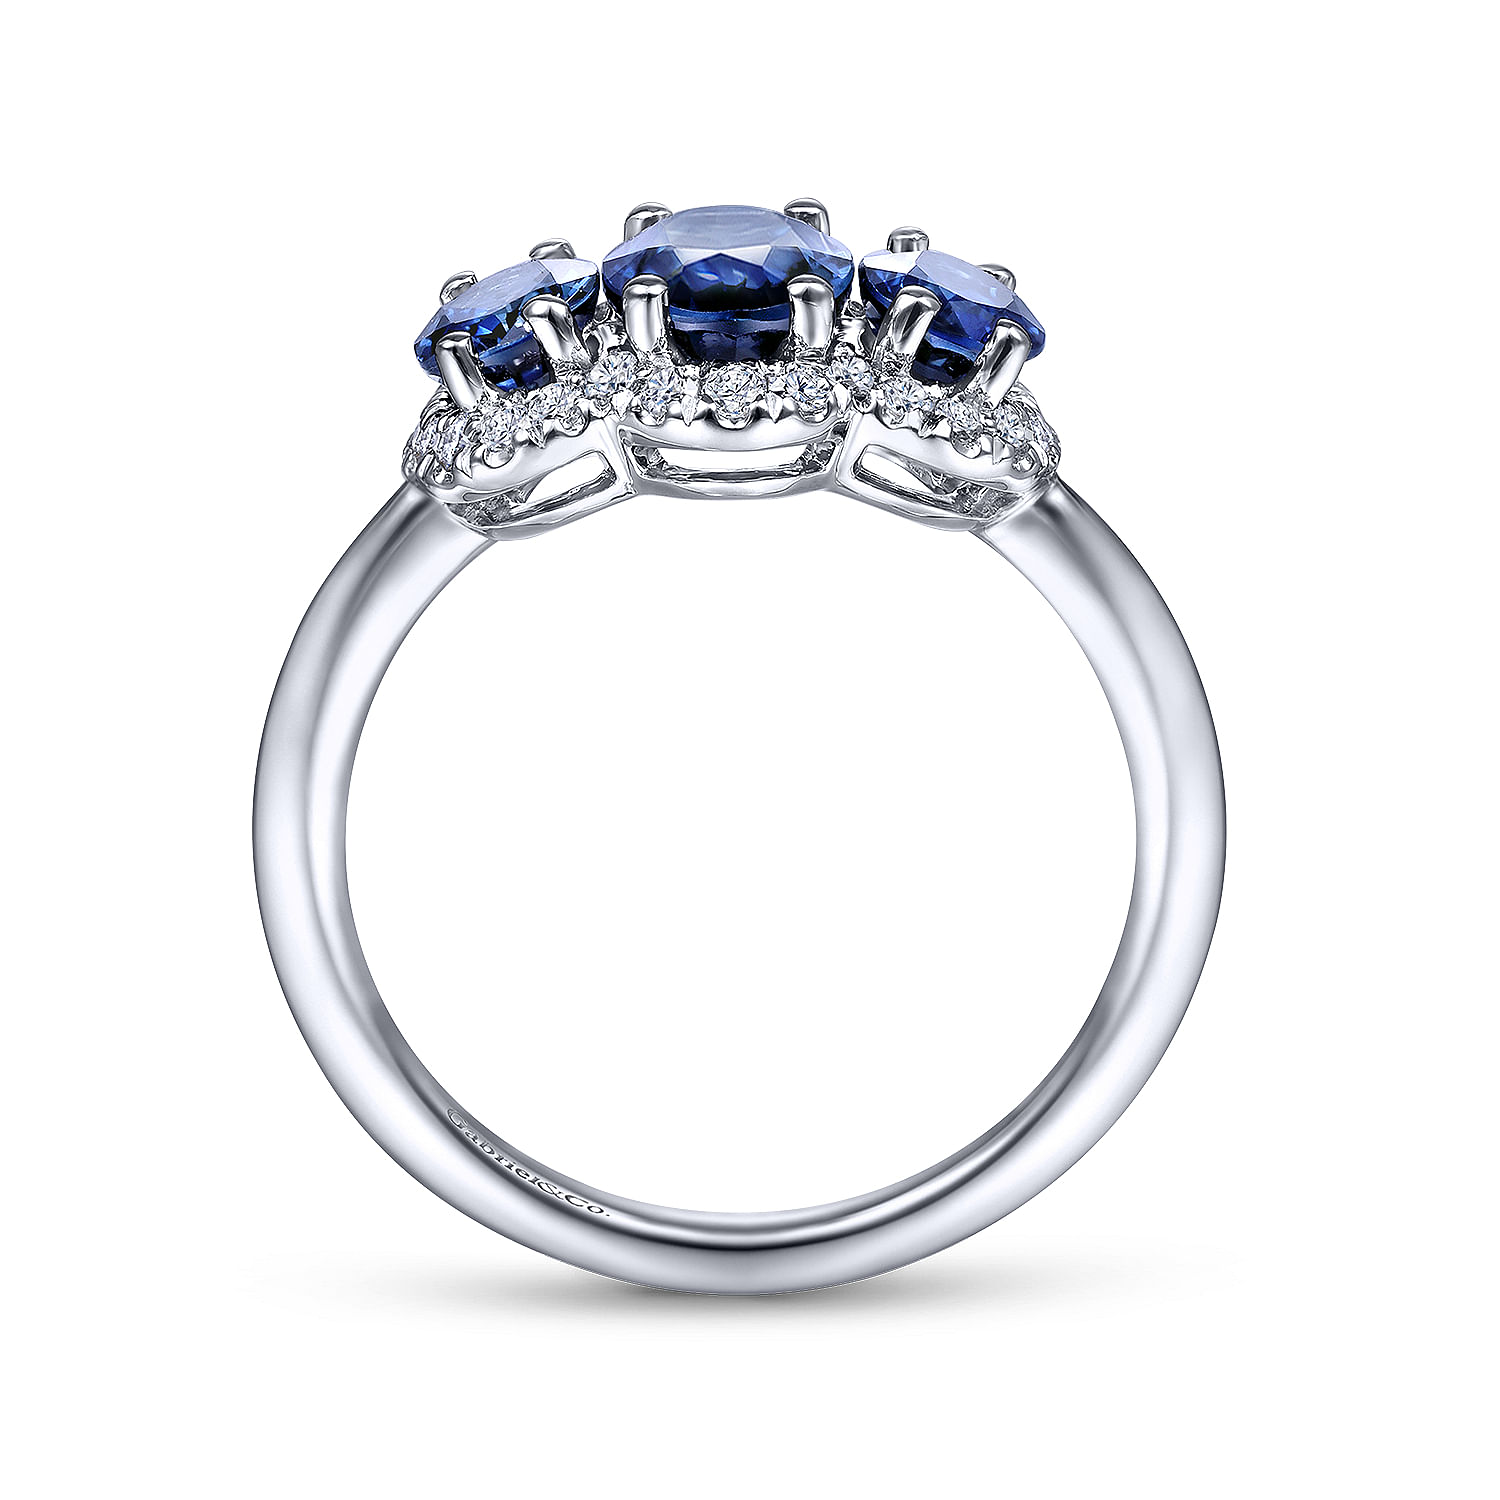 14K White Gold Diamond and Sapphire Oval Halo Ring